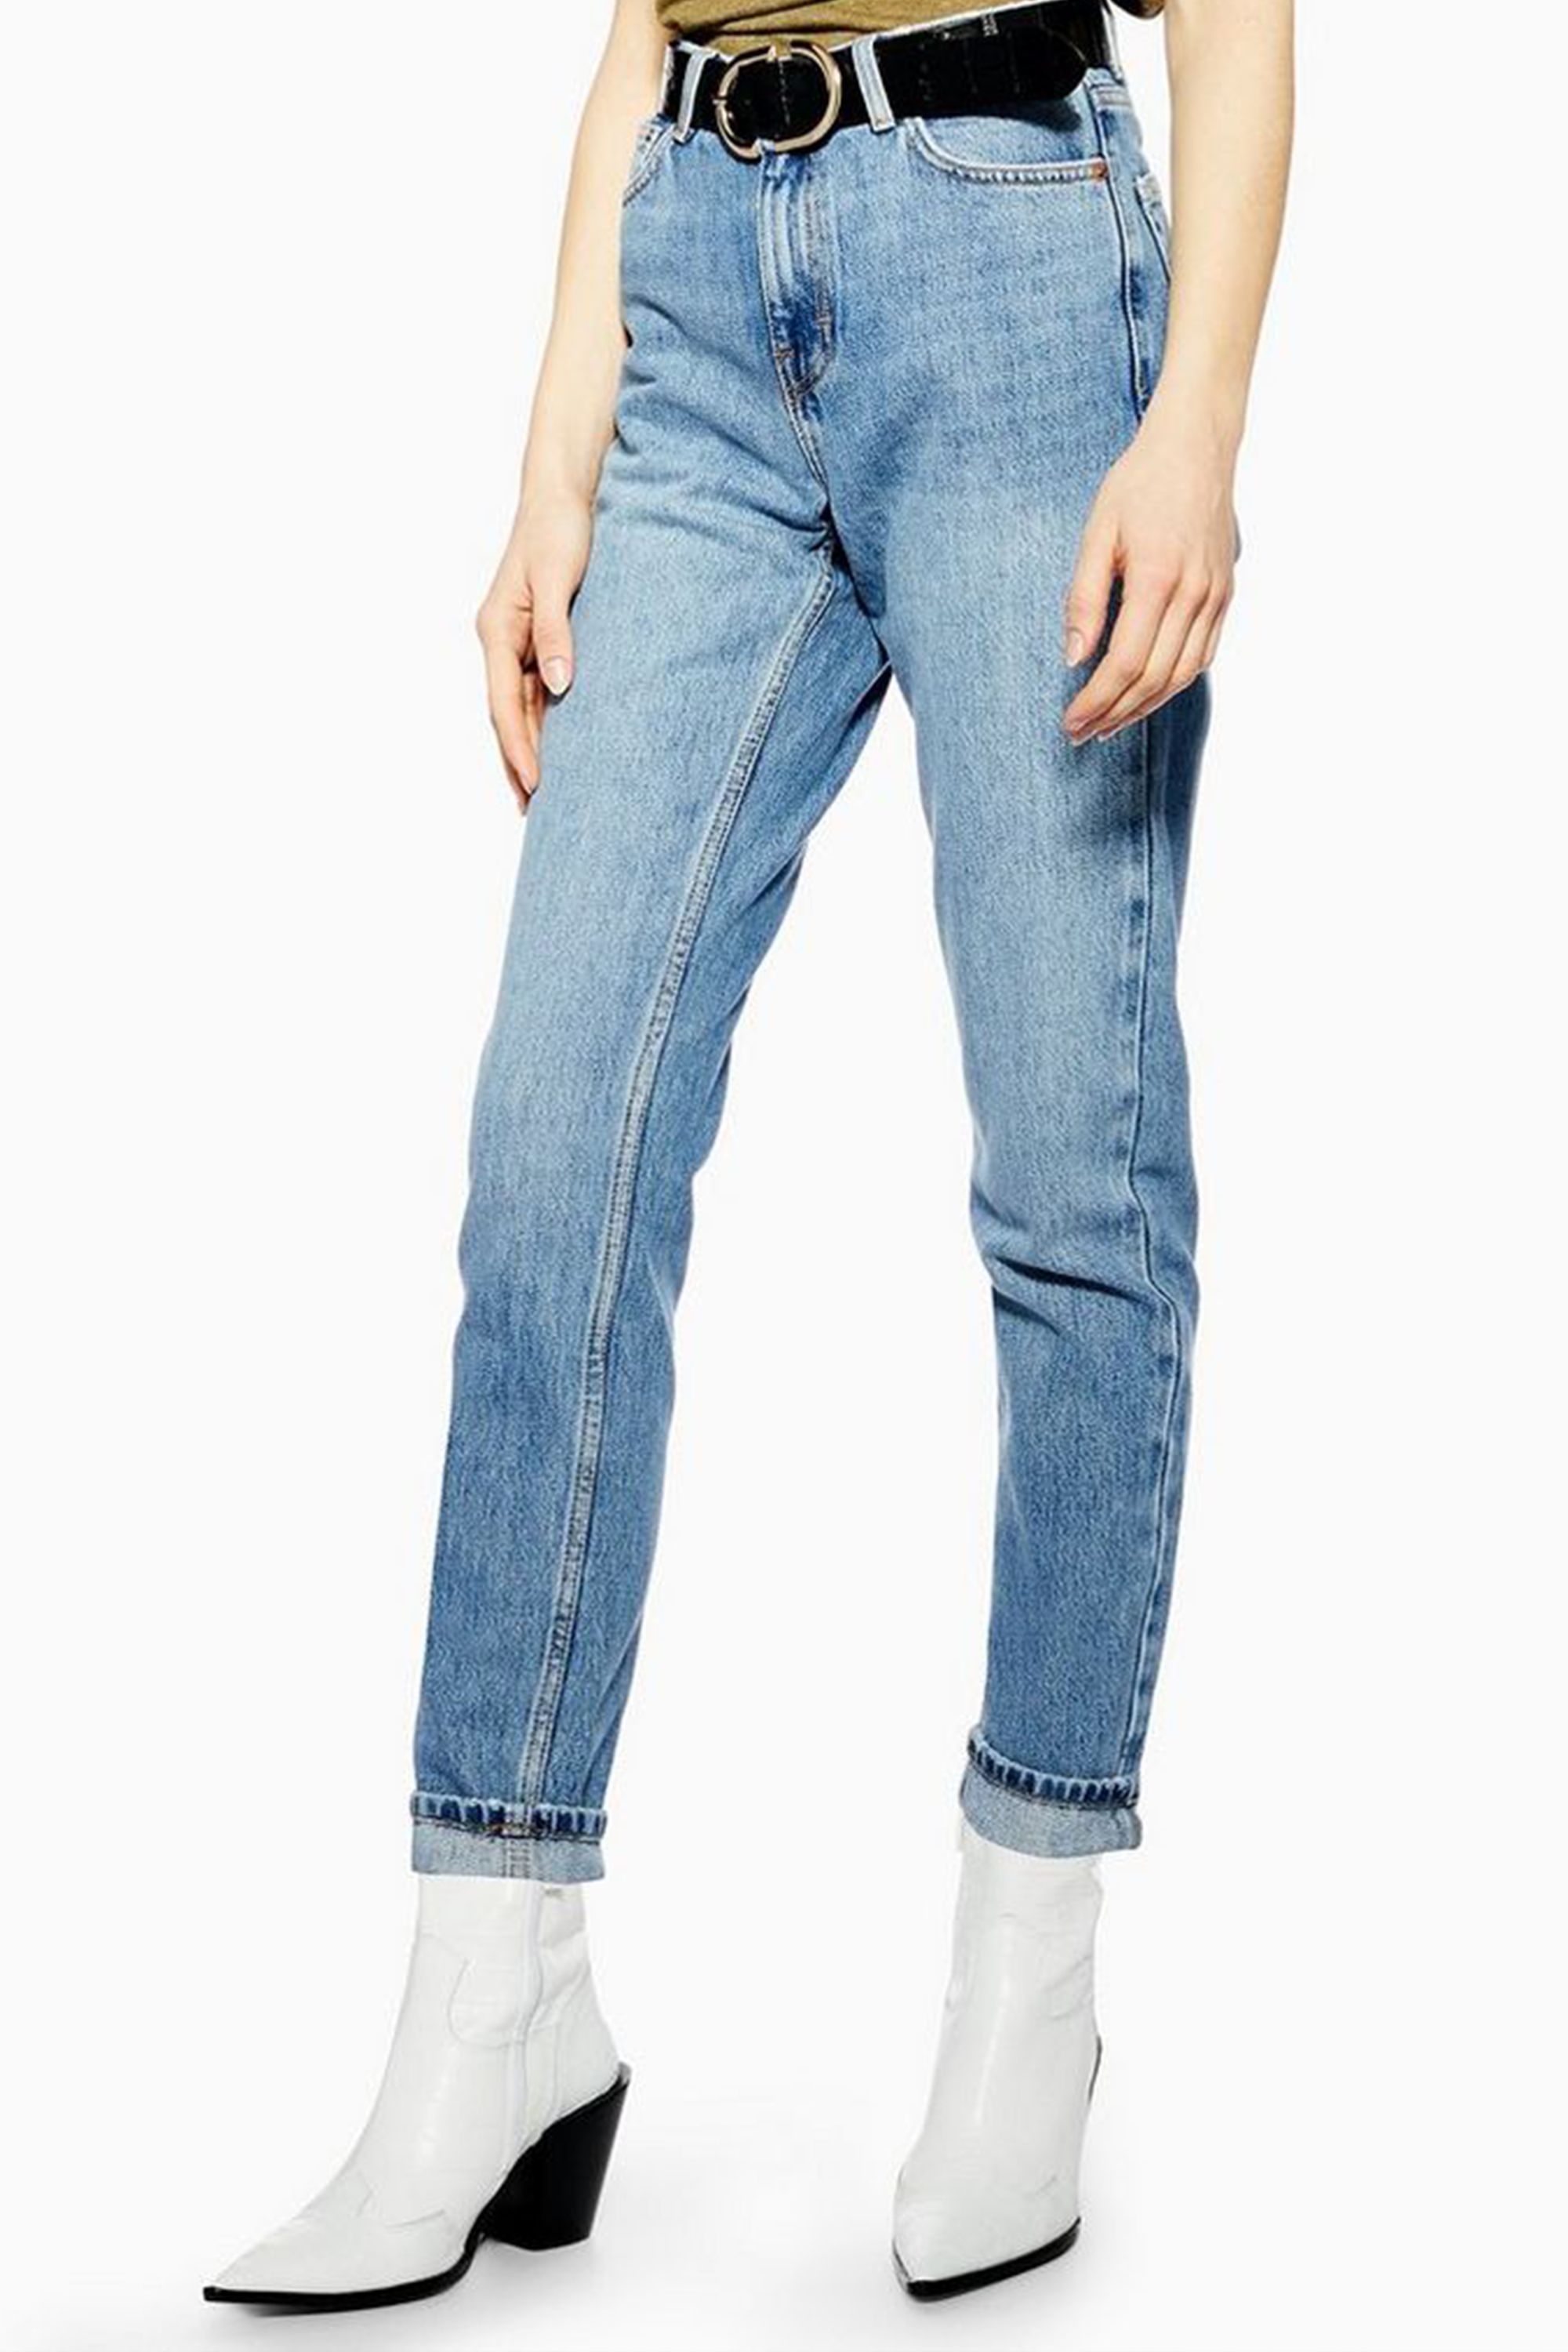 most flattering mom jeans